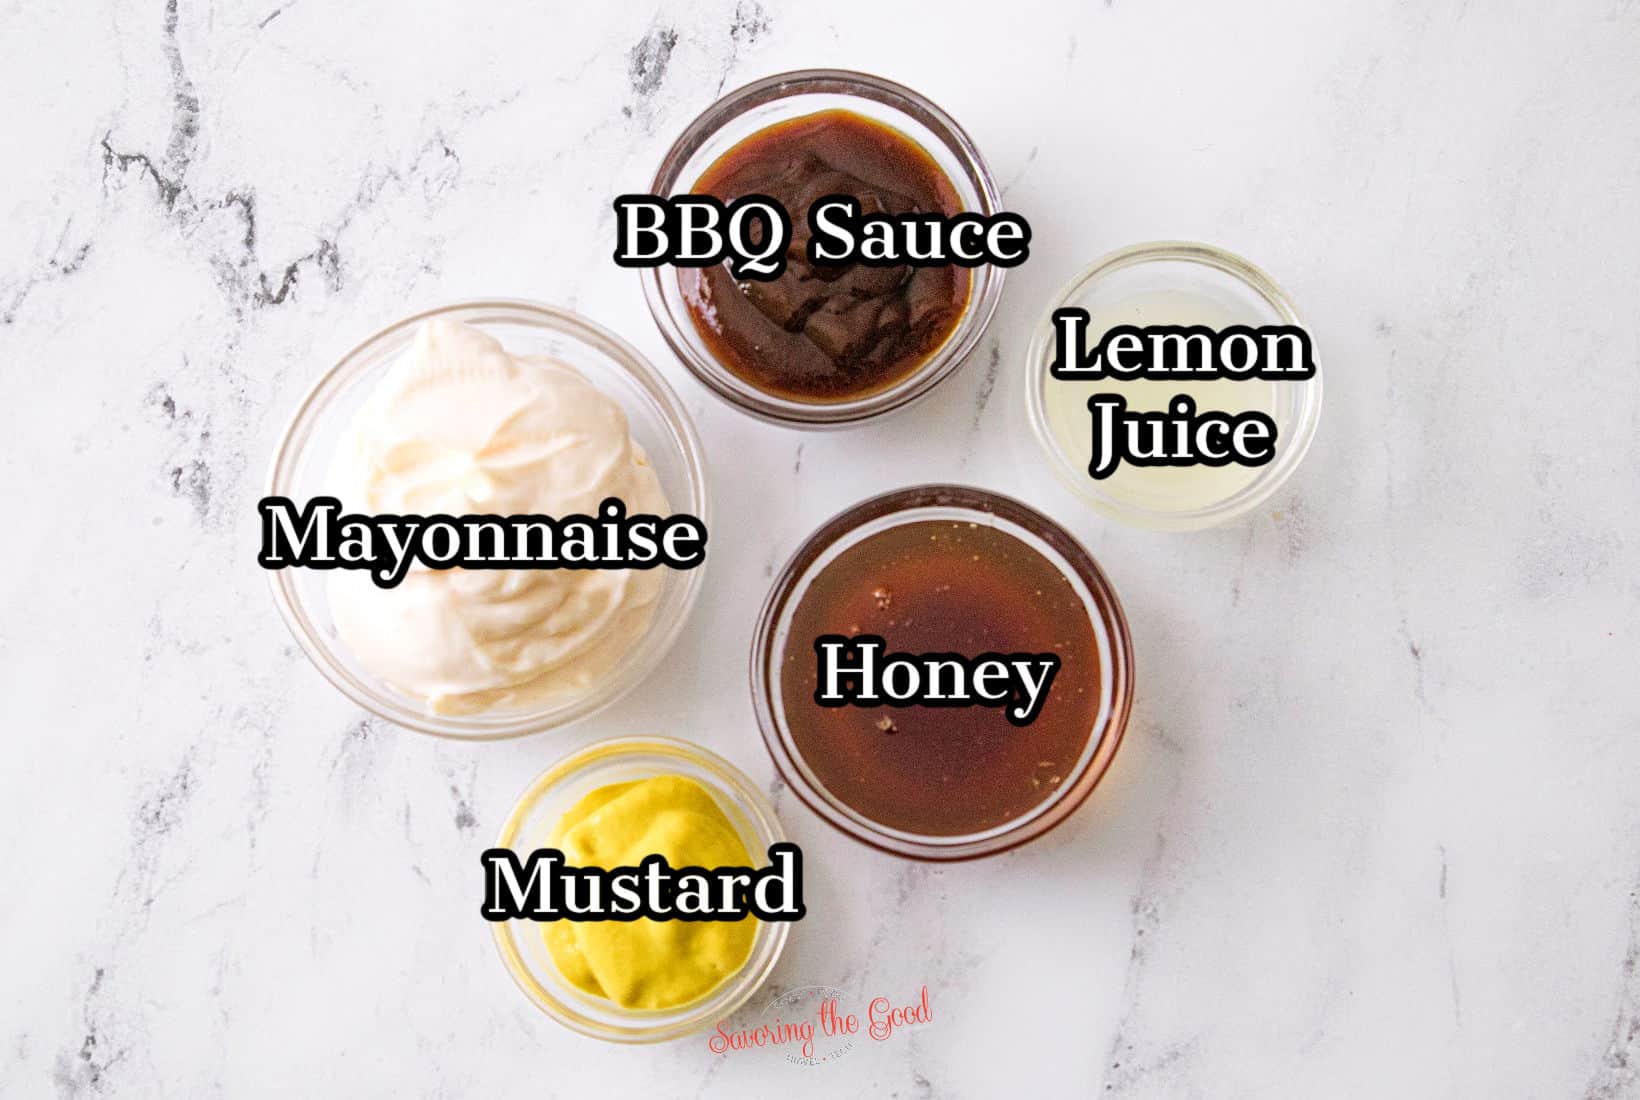 chick fil a sauce ingredients in bowls with text overlay labeling them. BBQ sauce, mayonnaise, mustard, honey, lemon juice.